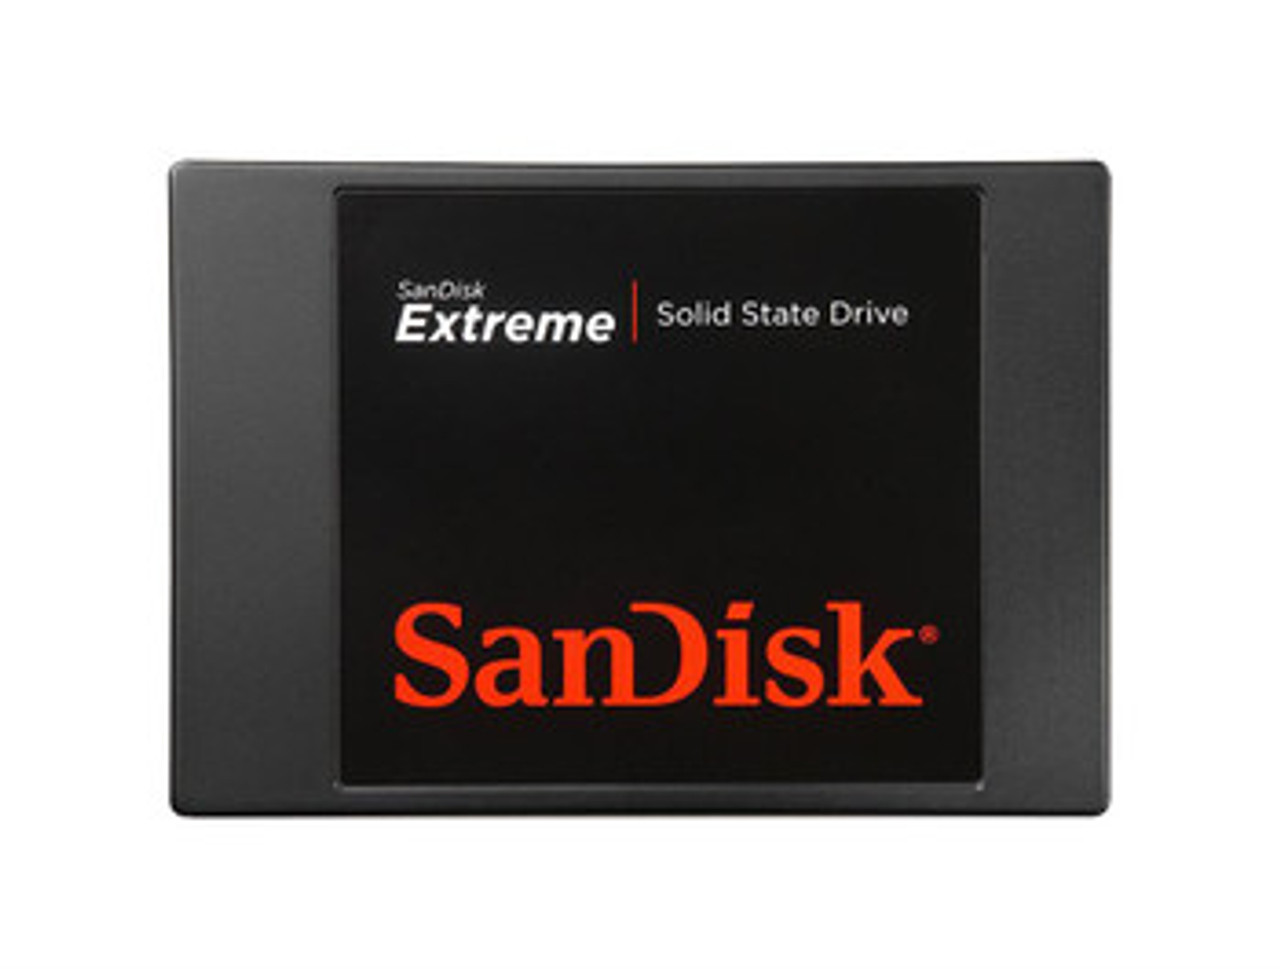 101744 | SanDisk | Extreme 480GB MLC SATA 6Gbps 2.5-inch Internal Solid State Drive (SSD)